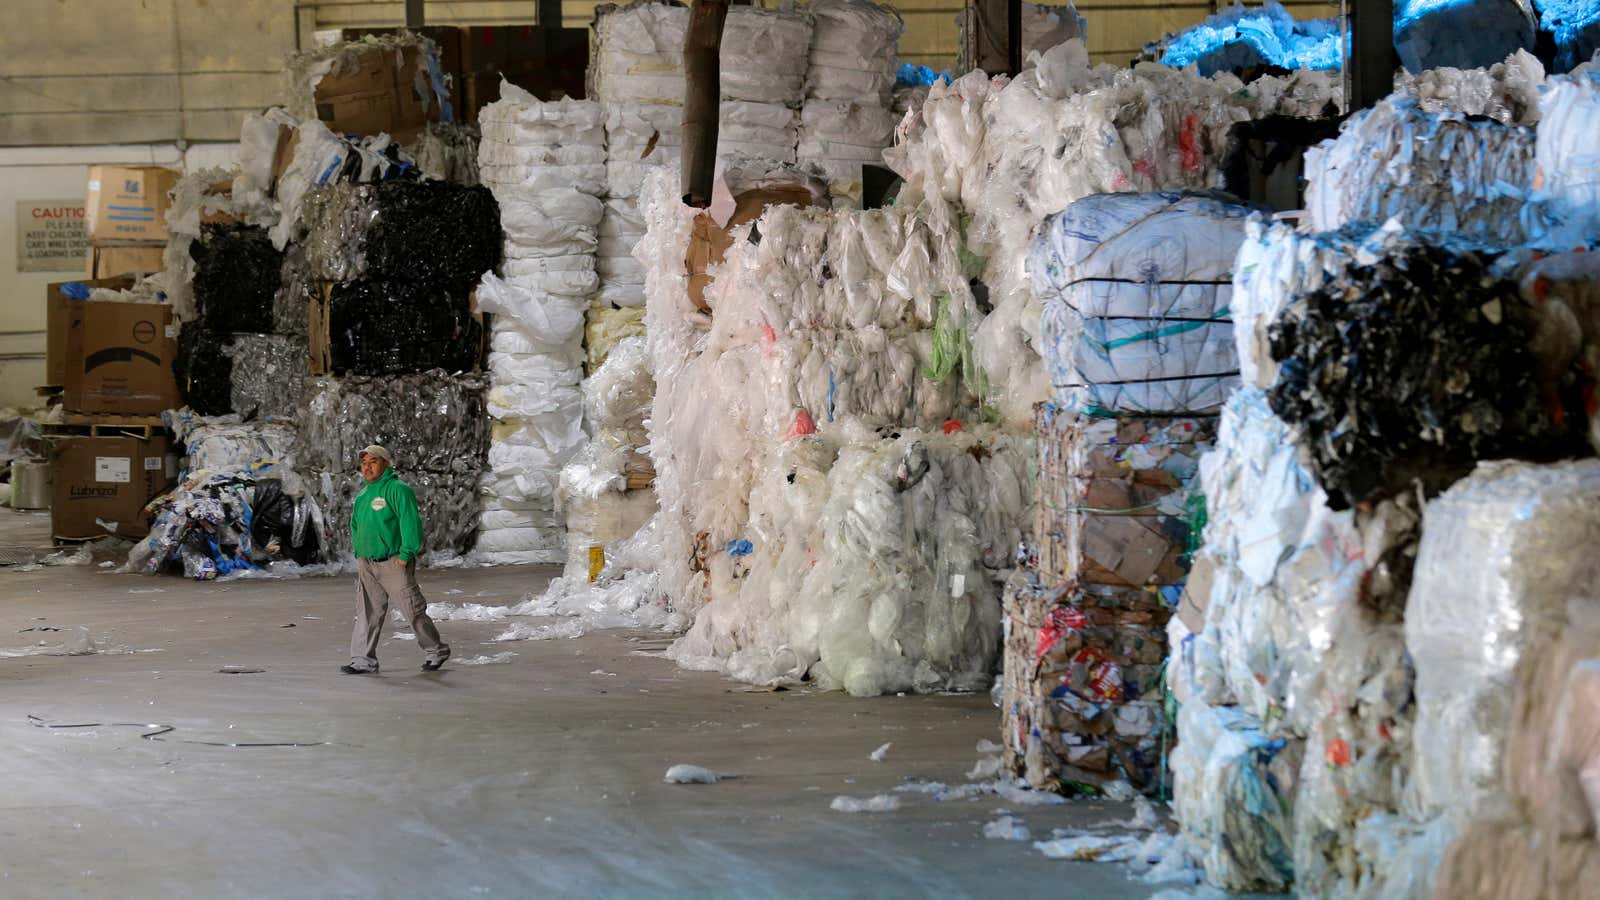 After China stopped taking the US’s plastic trash, it started piling up. California wants to do something about it.